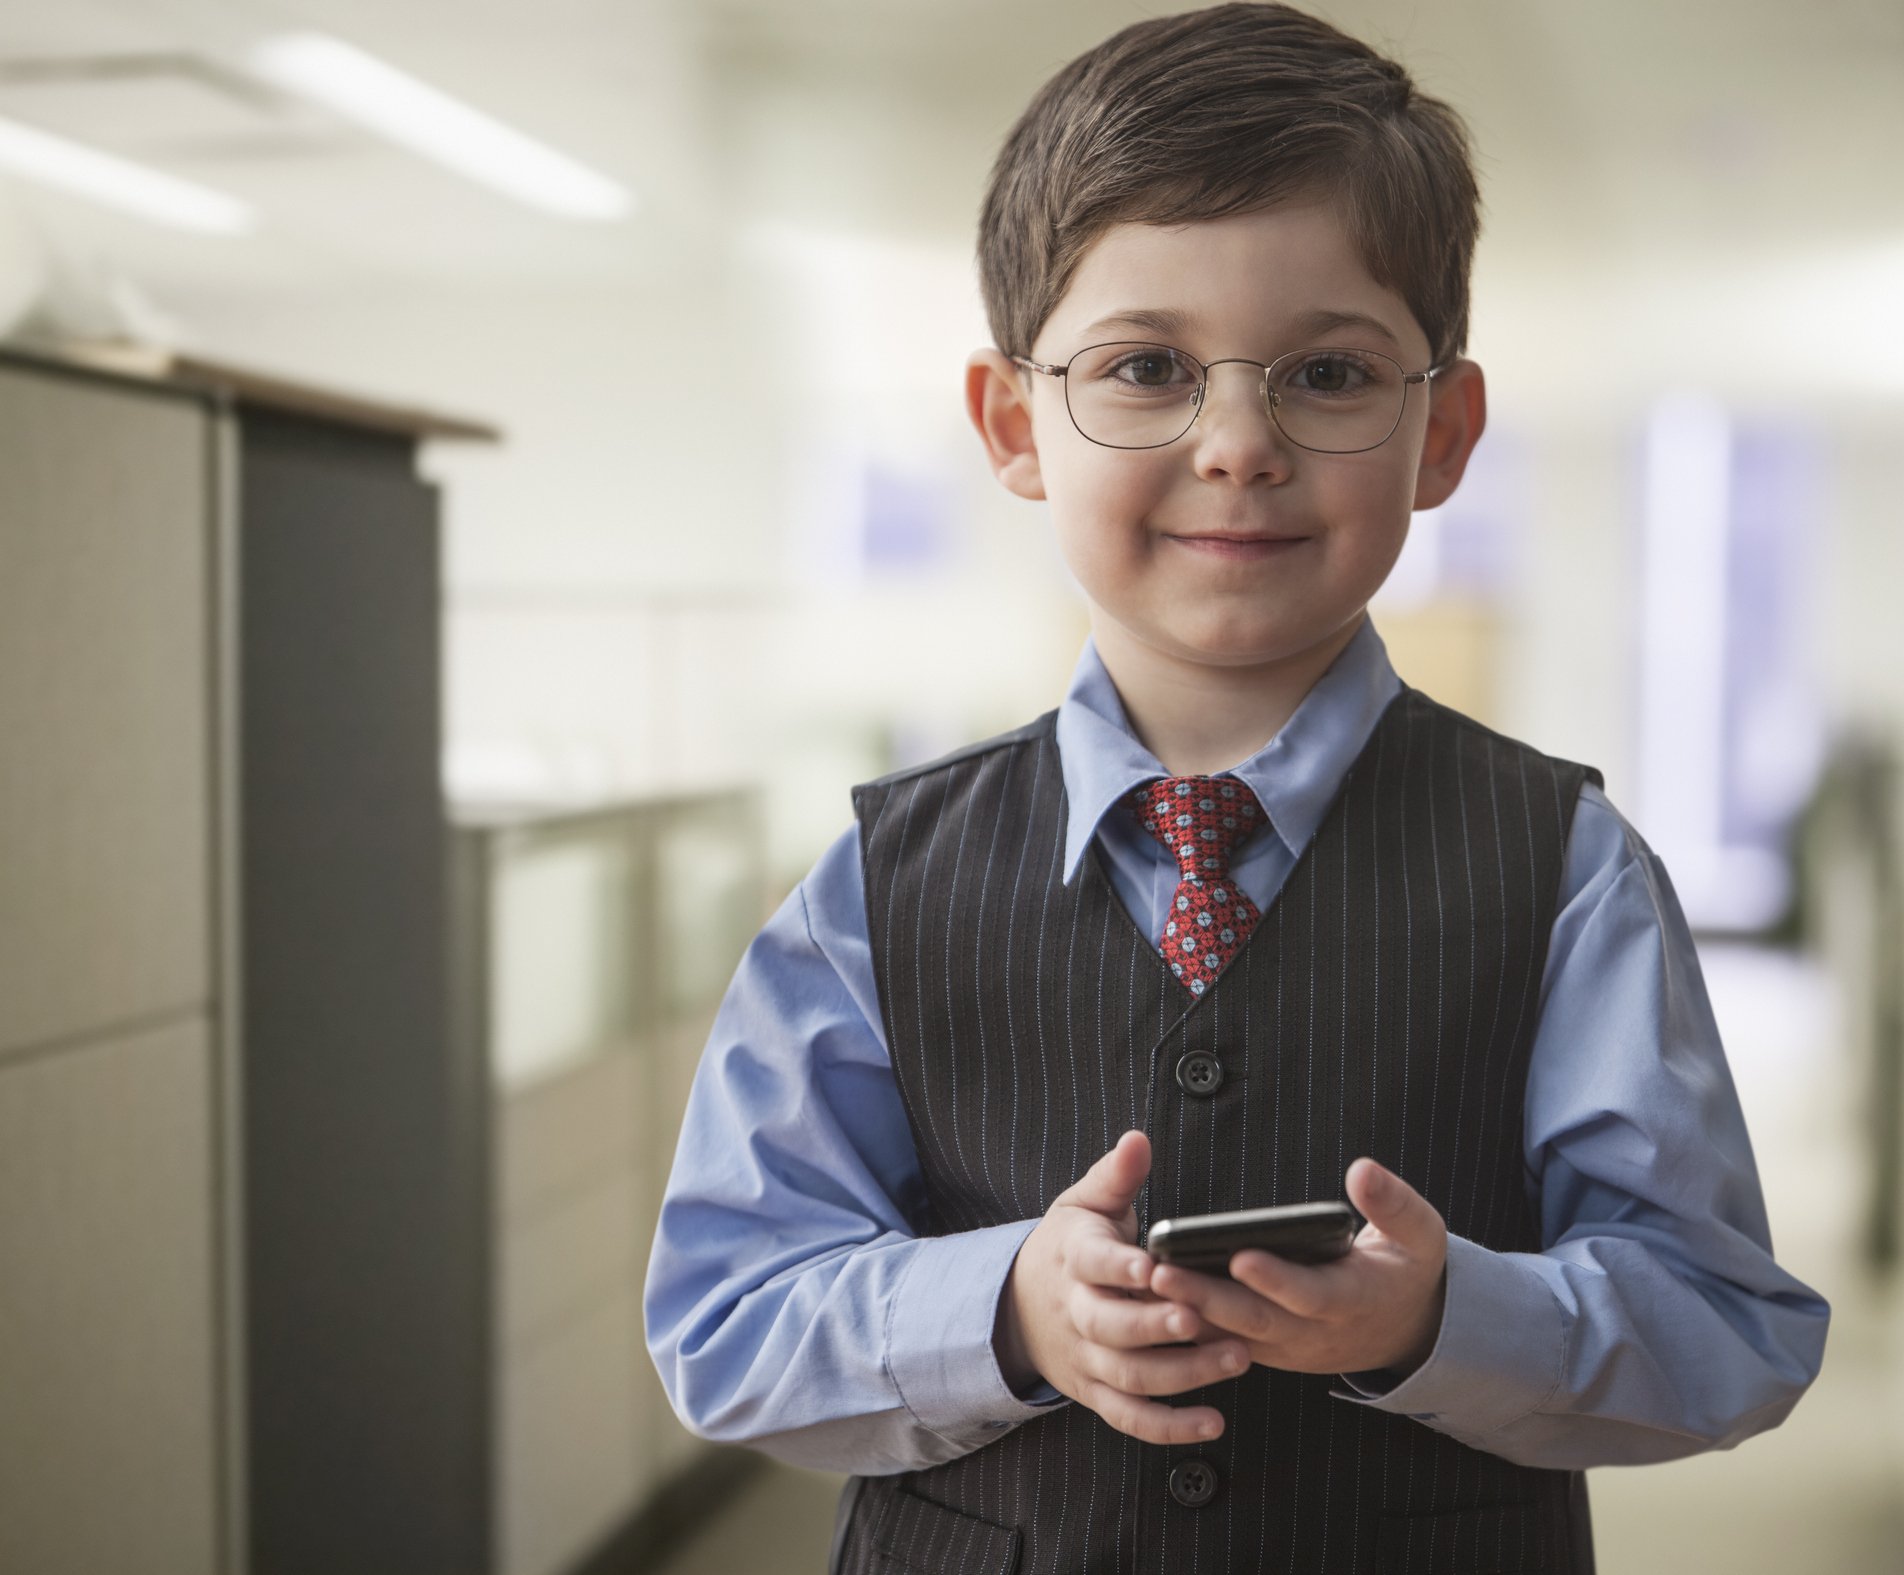 Photo of boy wearing businessman outfit in office | Photo: Getty Images